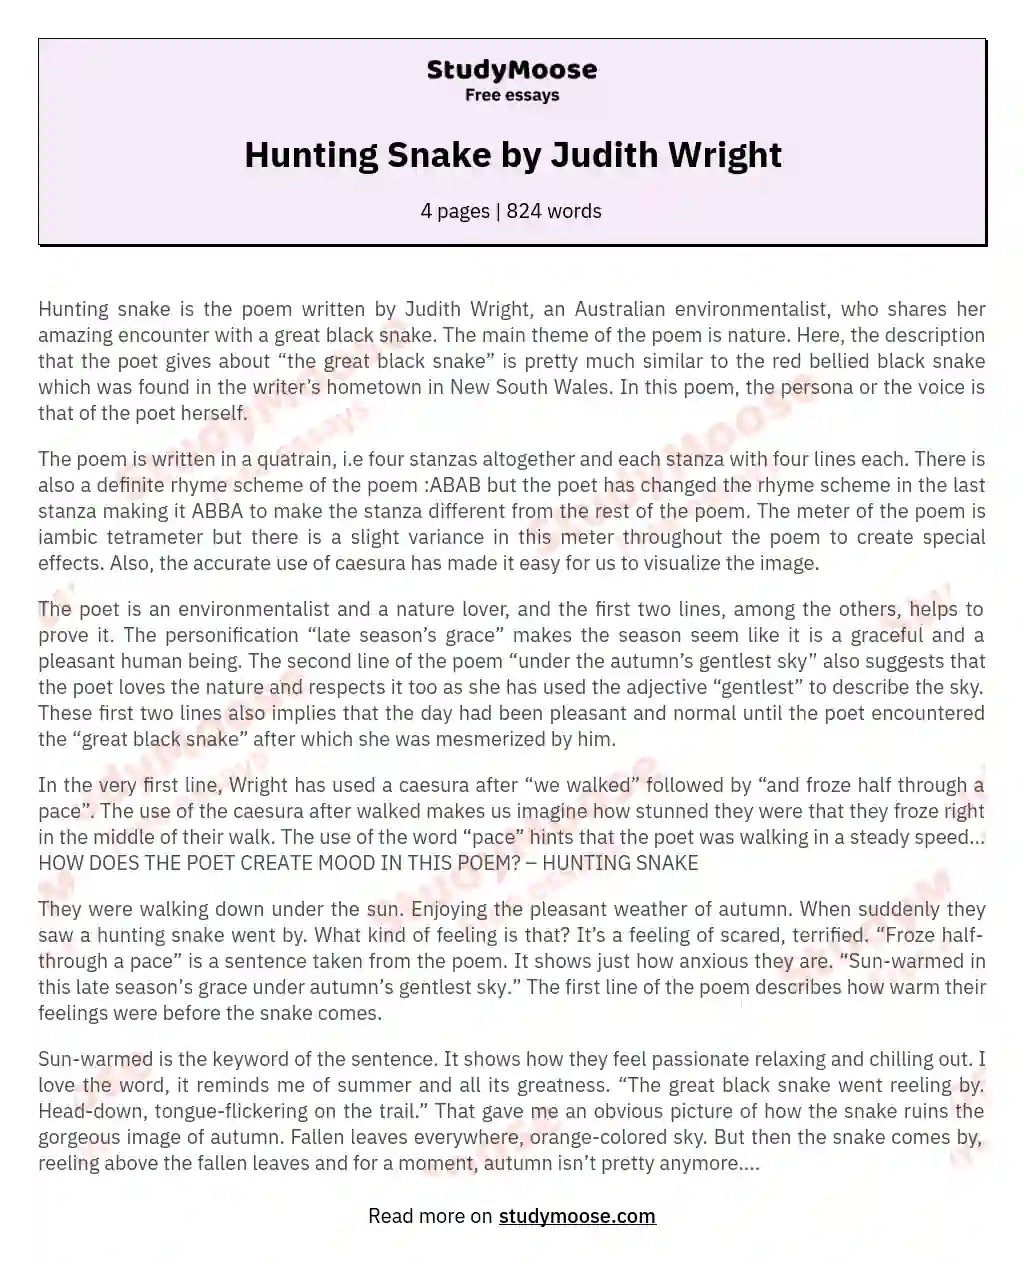 Hunting Snake by Judith Wright essay